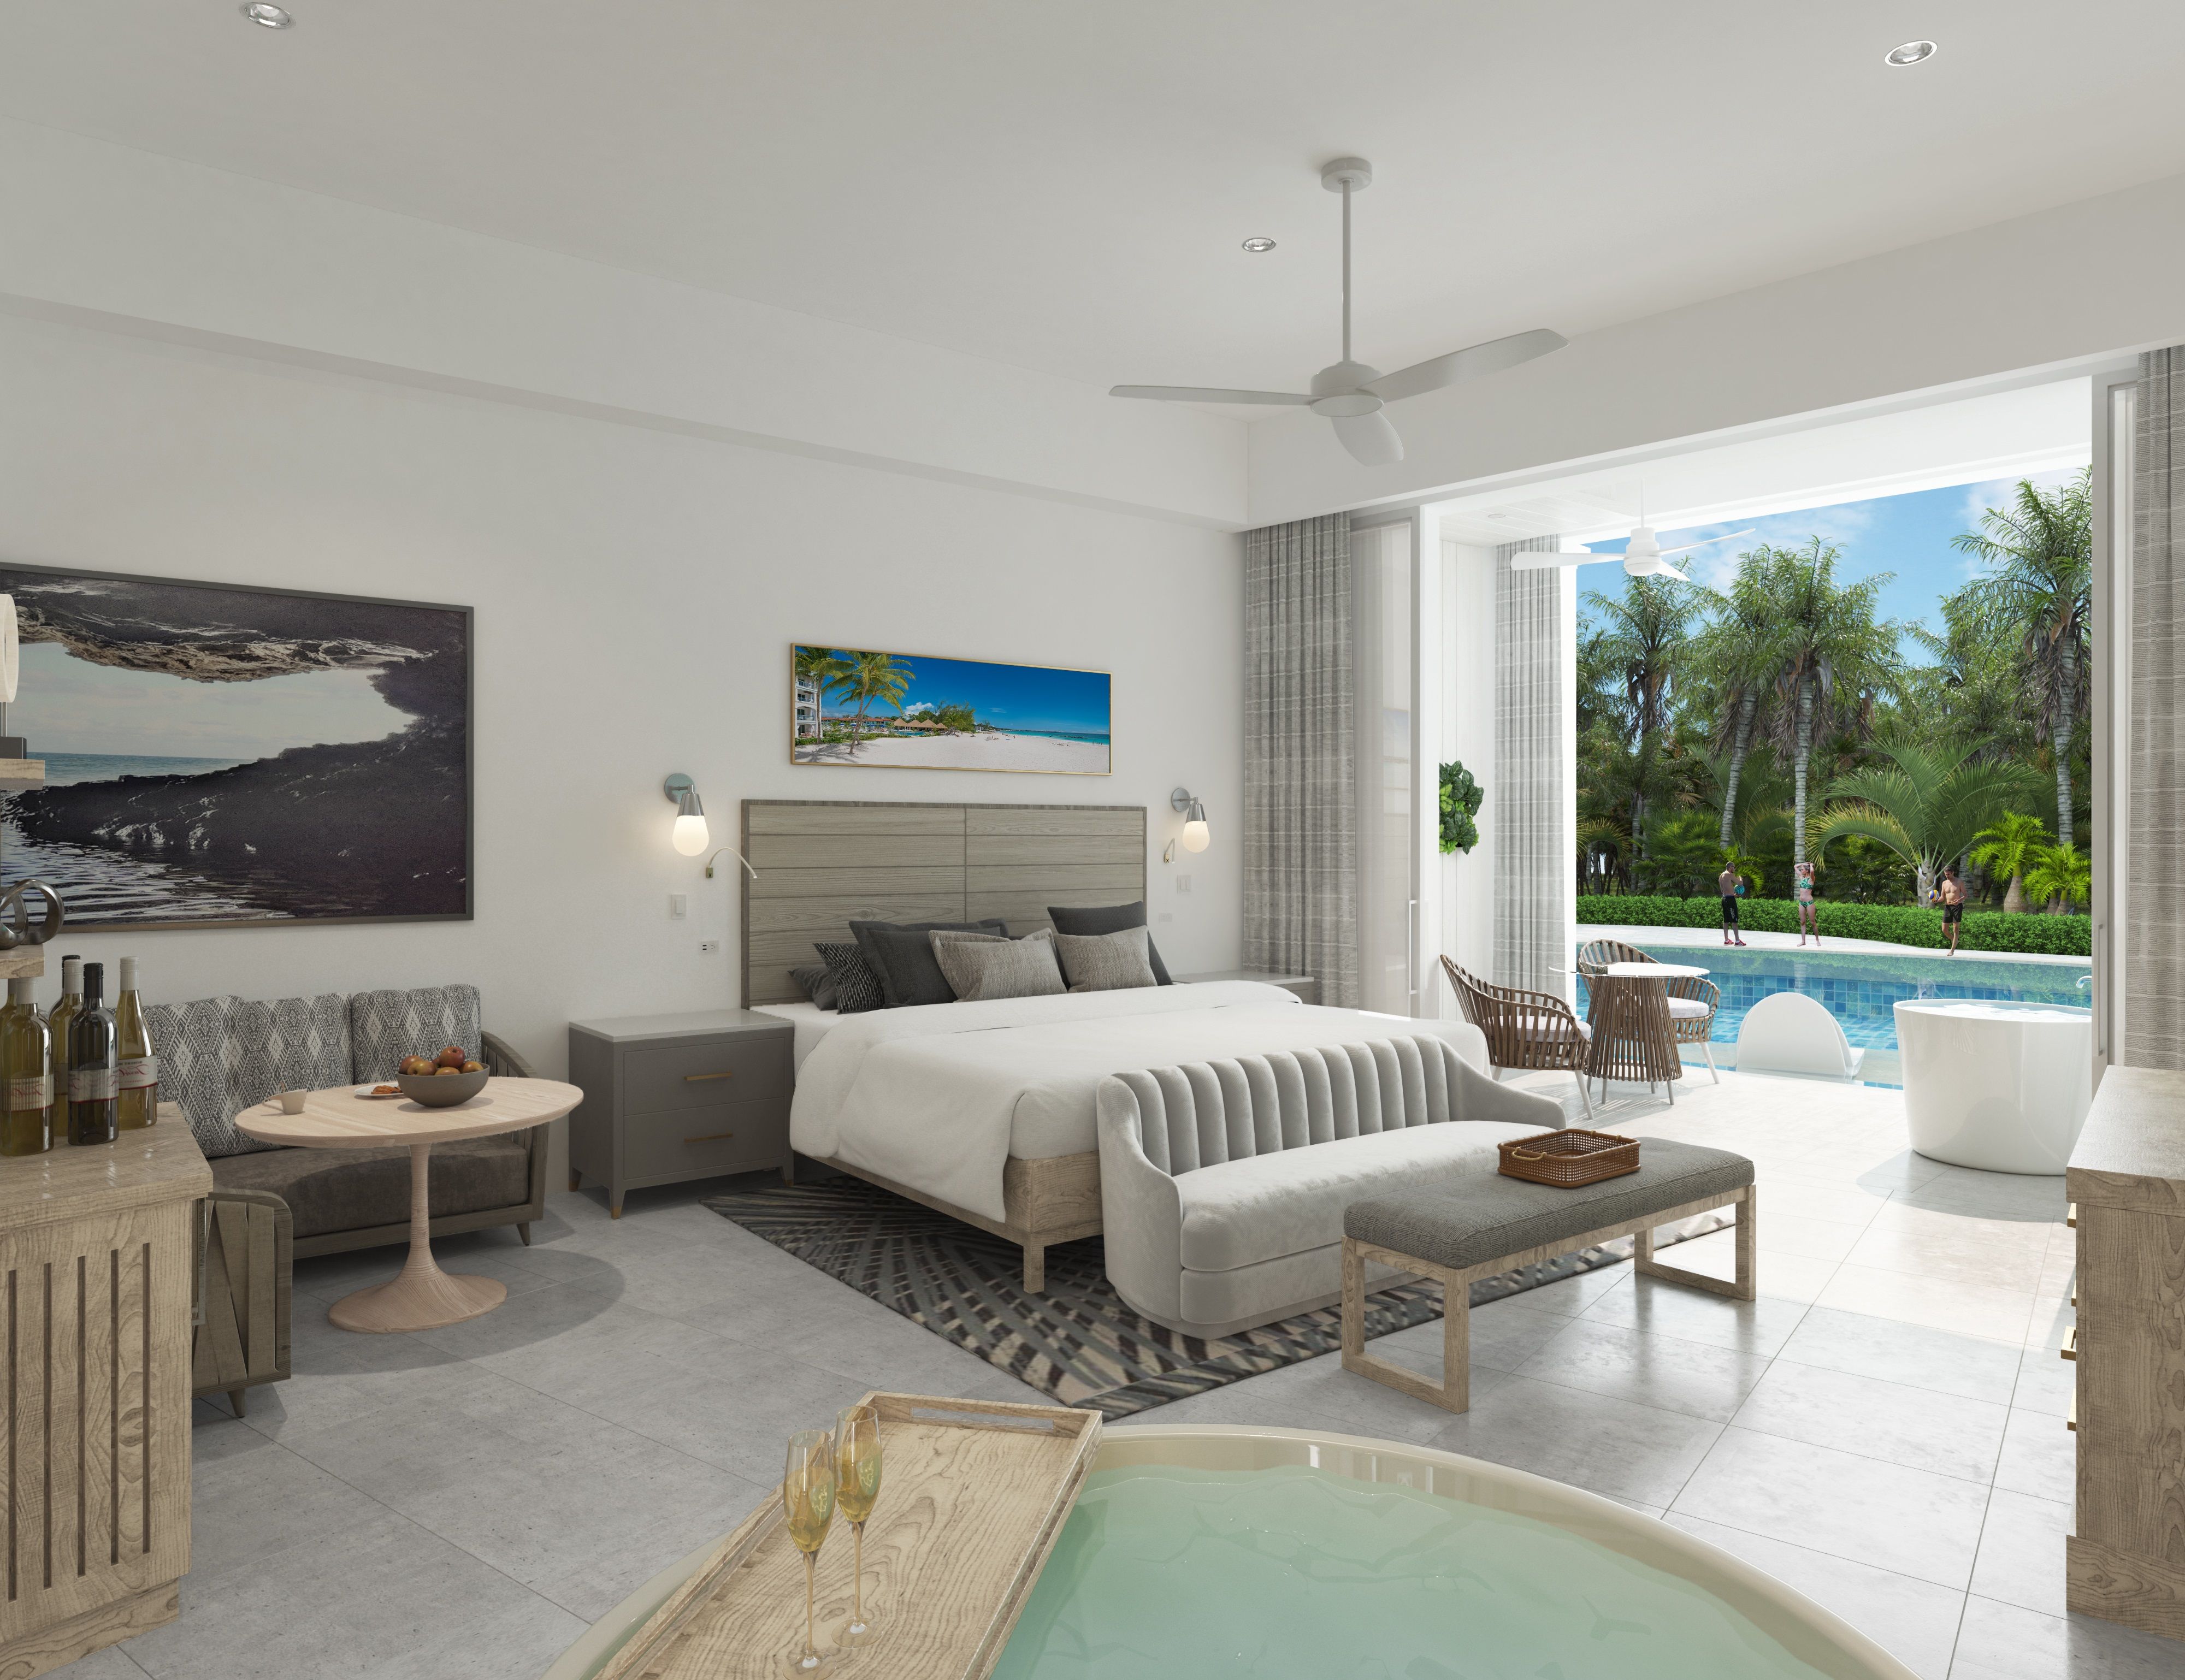 Sandals Resorts Unveil Signature Tranquility Soaking Tubs-Sandals Packages  and News